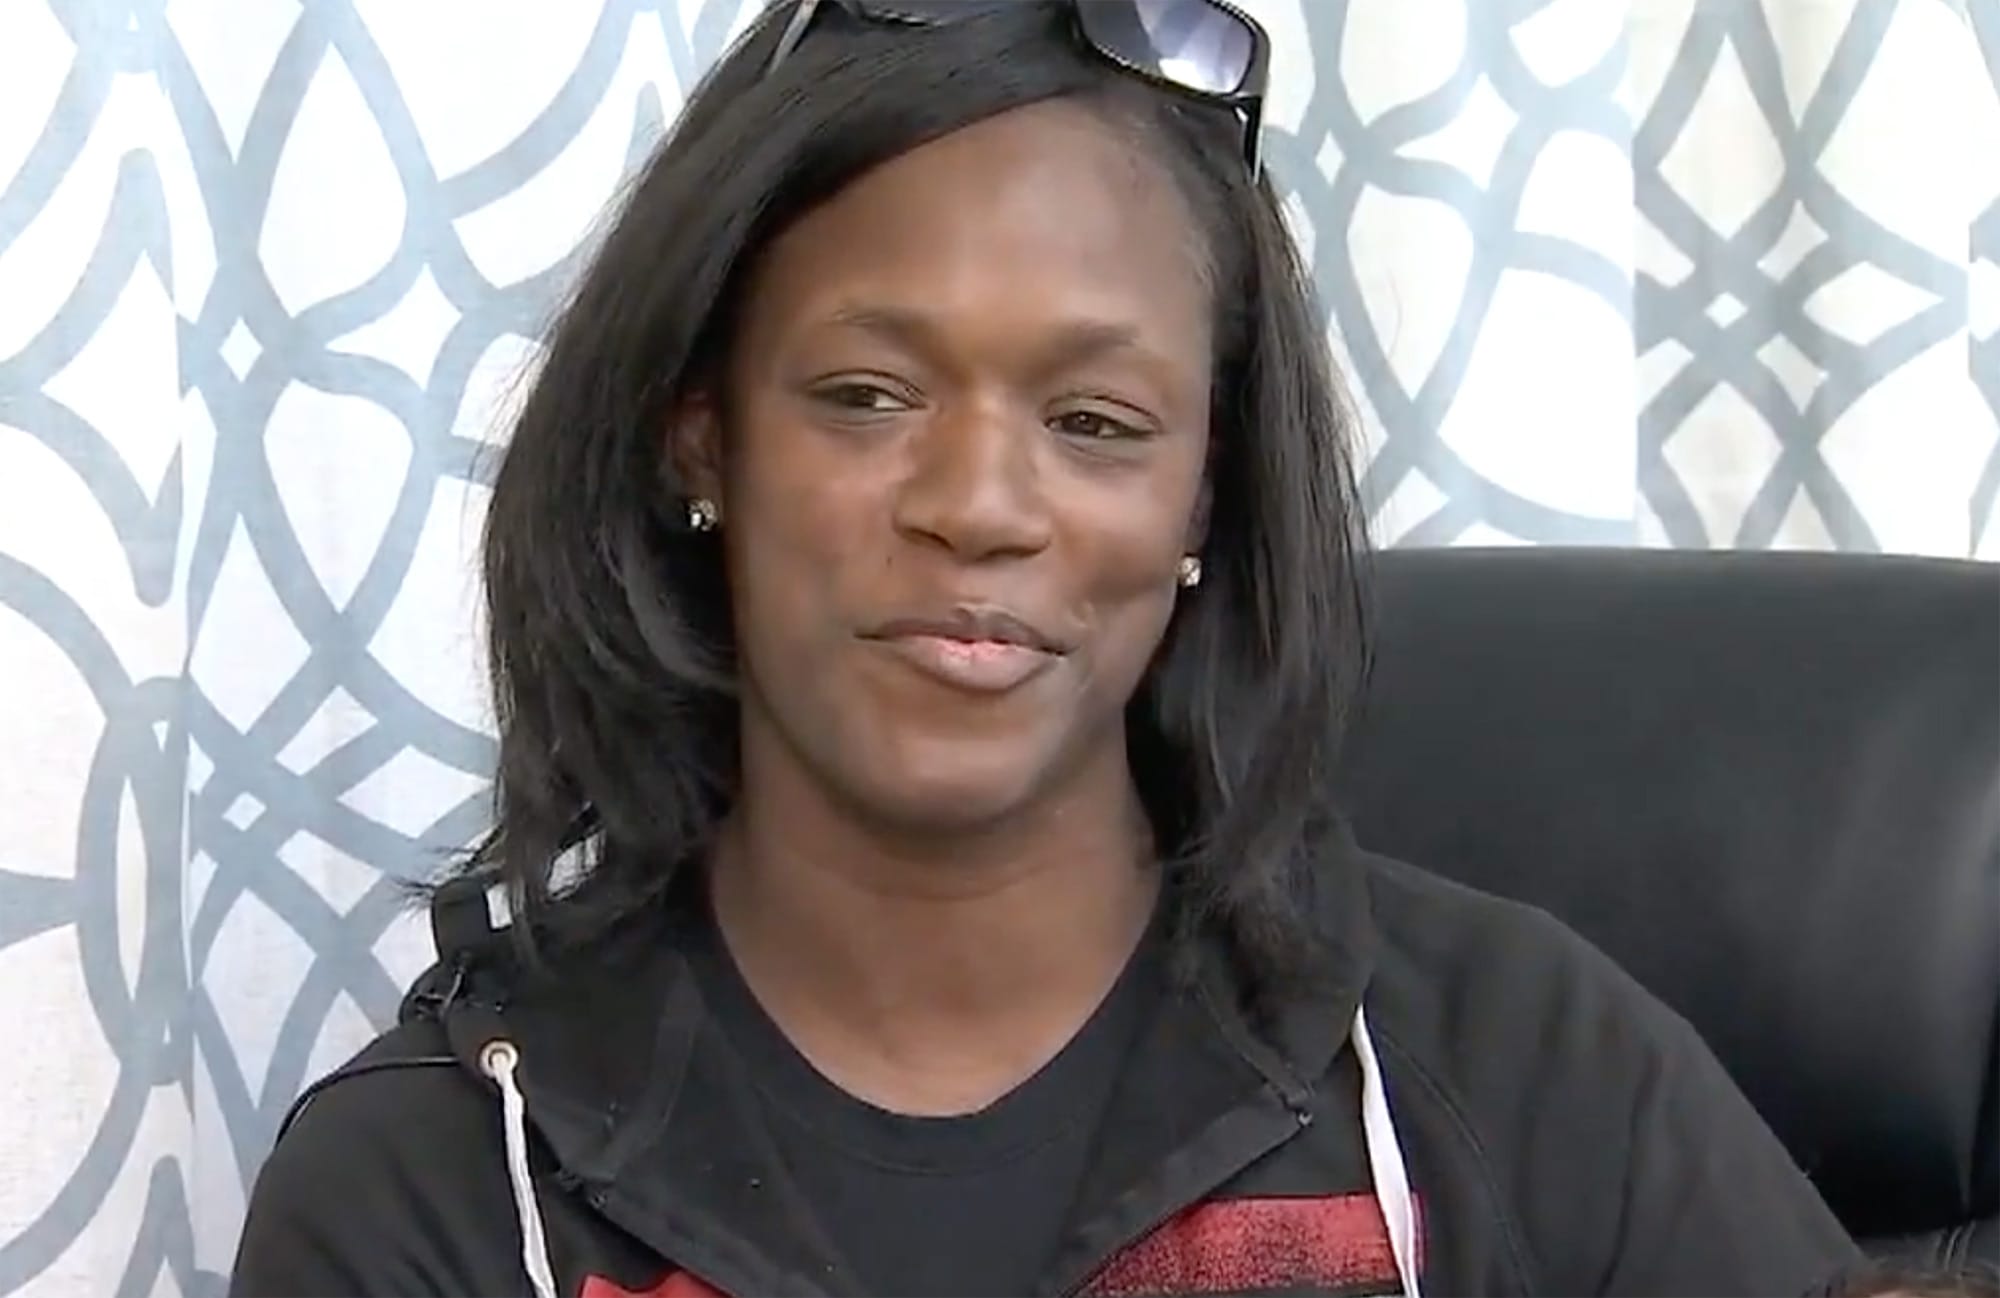 Sharmell Mitchell was interviewed in a KTVU report in 2016.